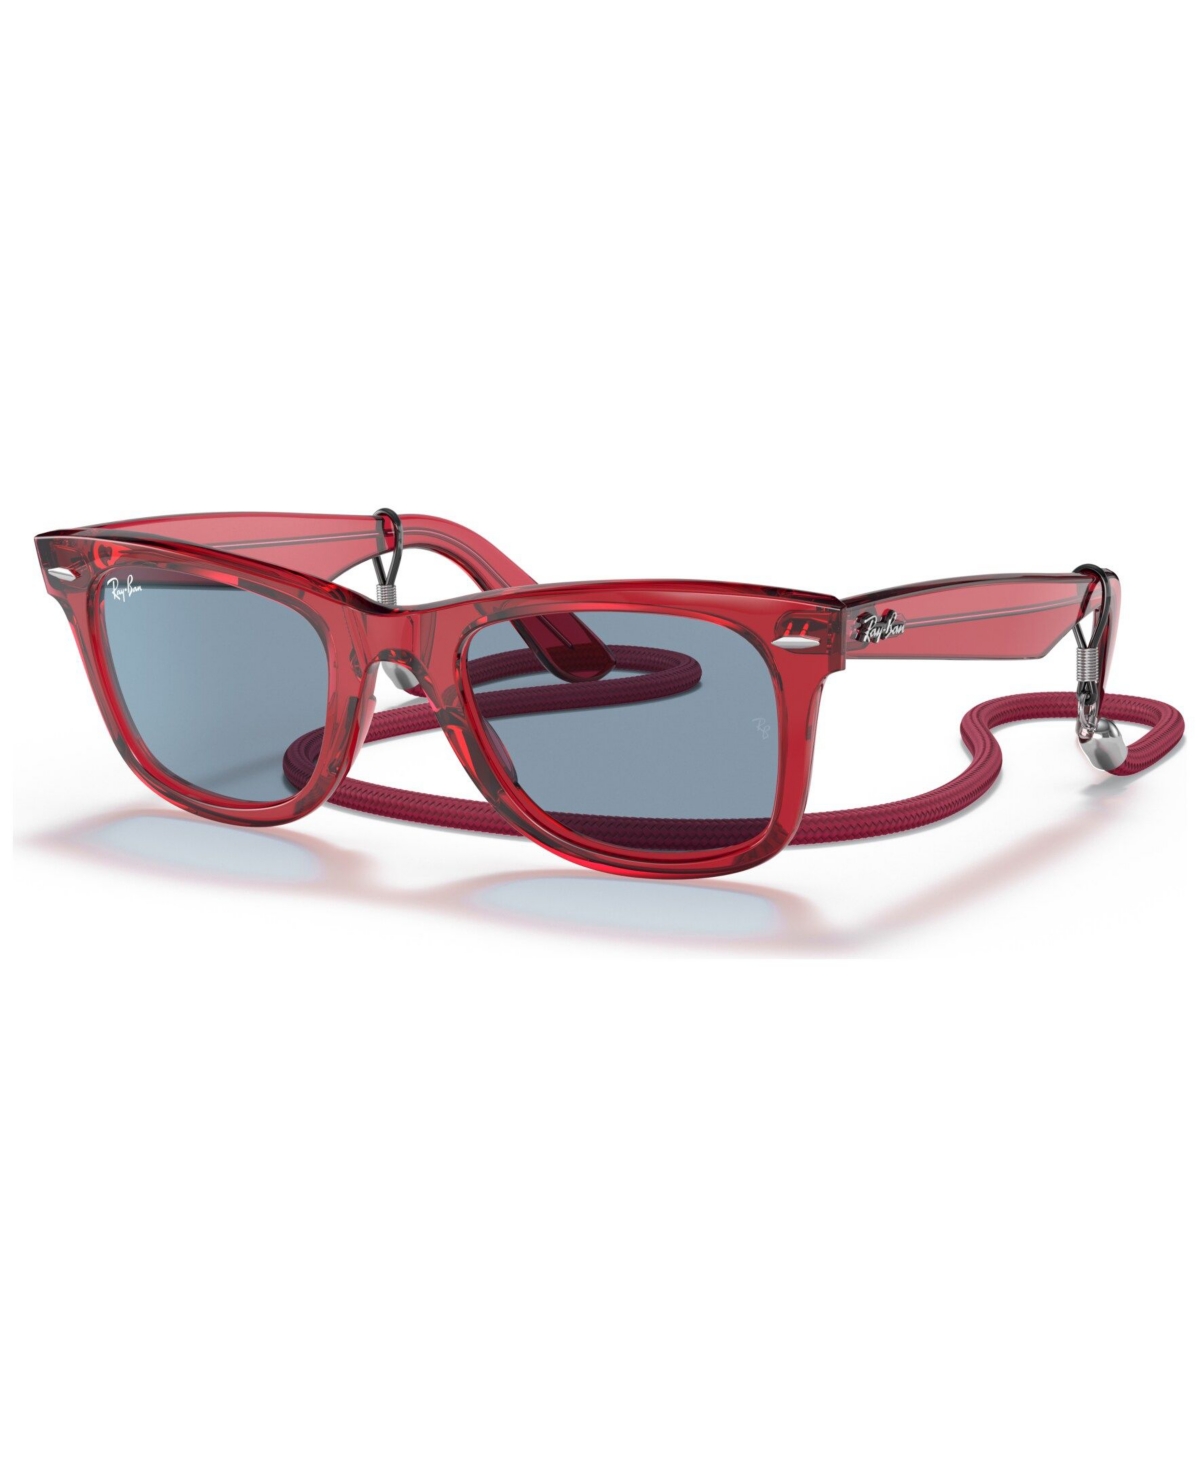 Ray Ban Unisex Sunglasses, Rb2140 Wayfarer In Transparent Red